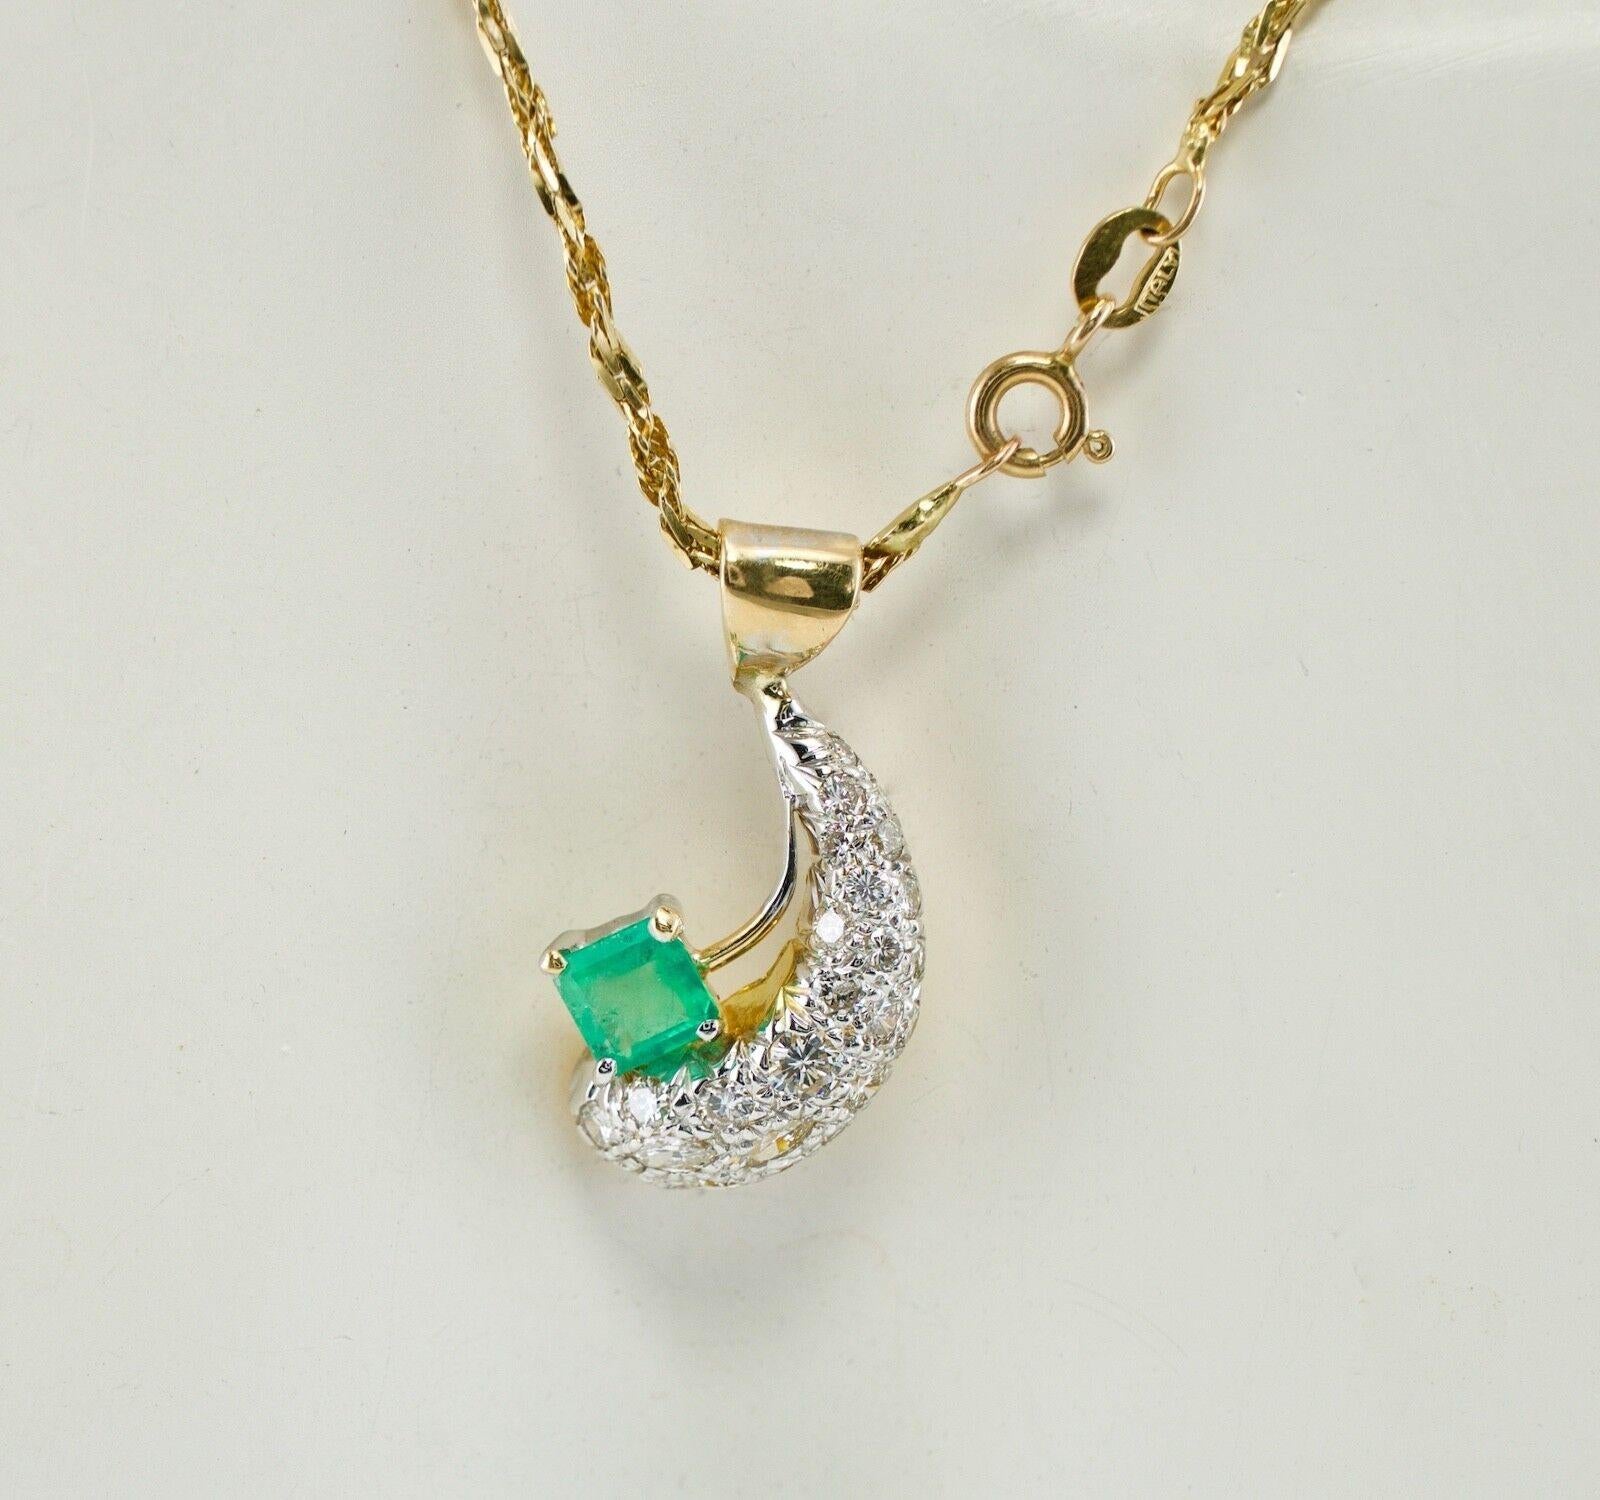 Diamond Emerald Crescent Pendant Necklace 18K Gold

This beautiful vintage pendant is finely crafted in solid 18K Yellow Gold (carefully tested and guaranteed), and set with natural Emerald and diamonds. The square-cut emerald measures 6x6mm (.92